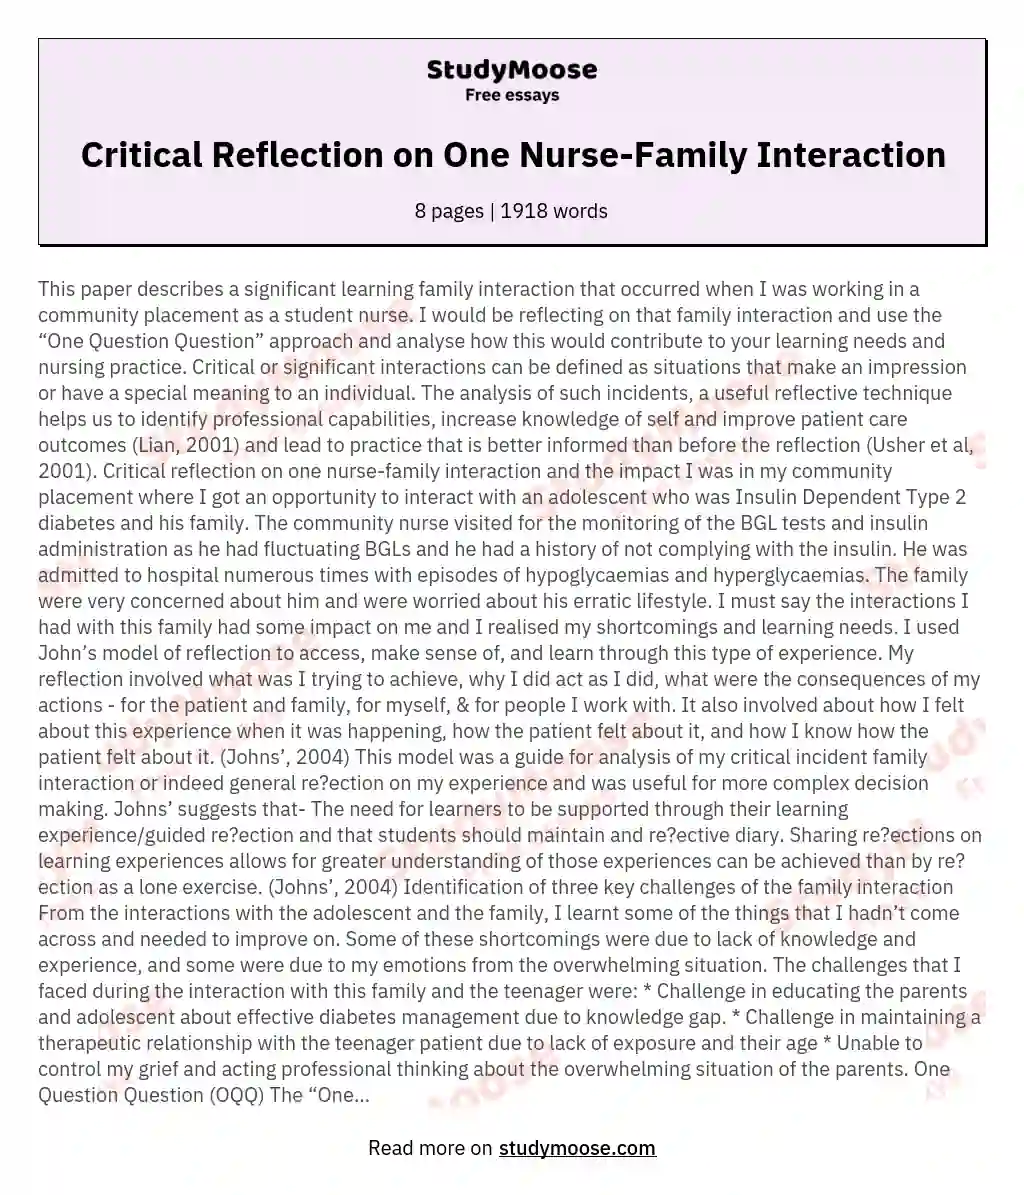 Critical Reflection on One Nurse-Family Interaction essay